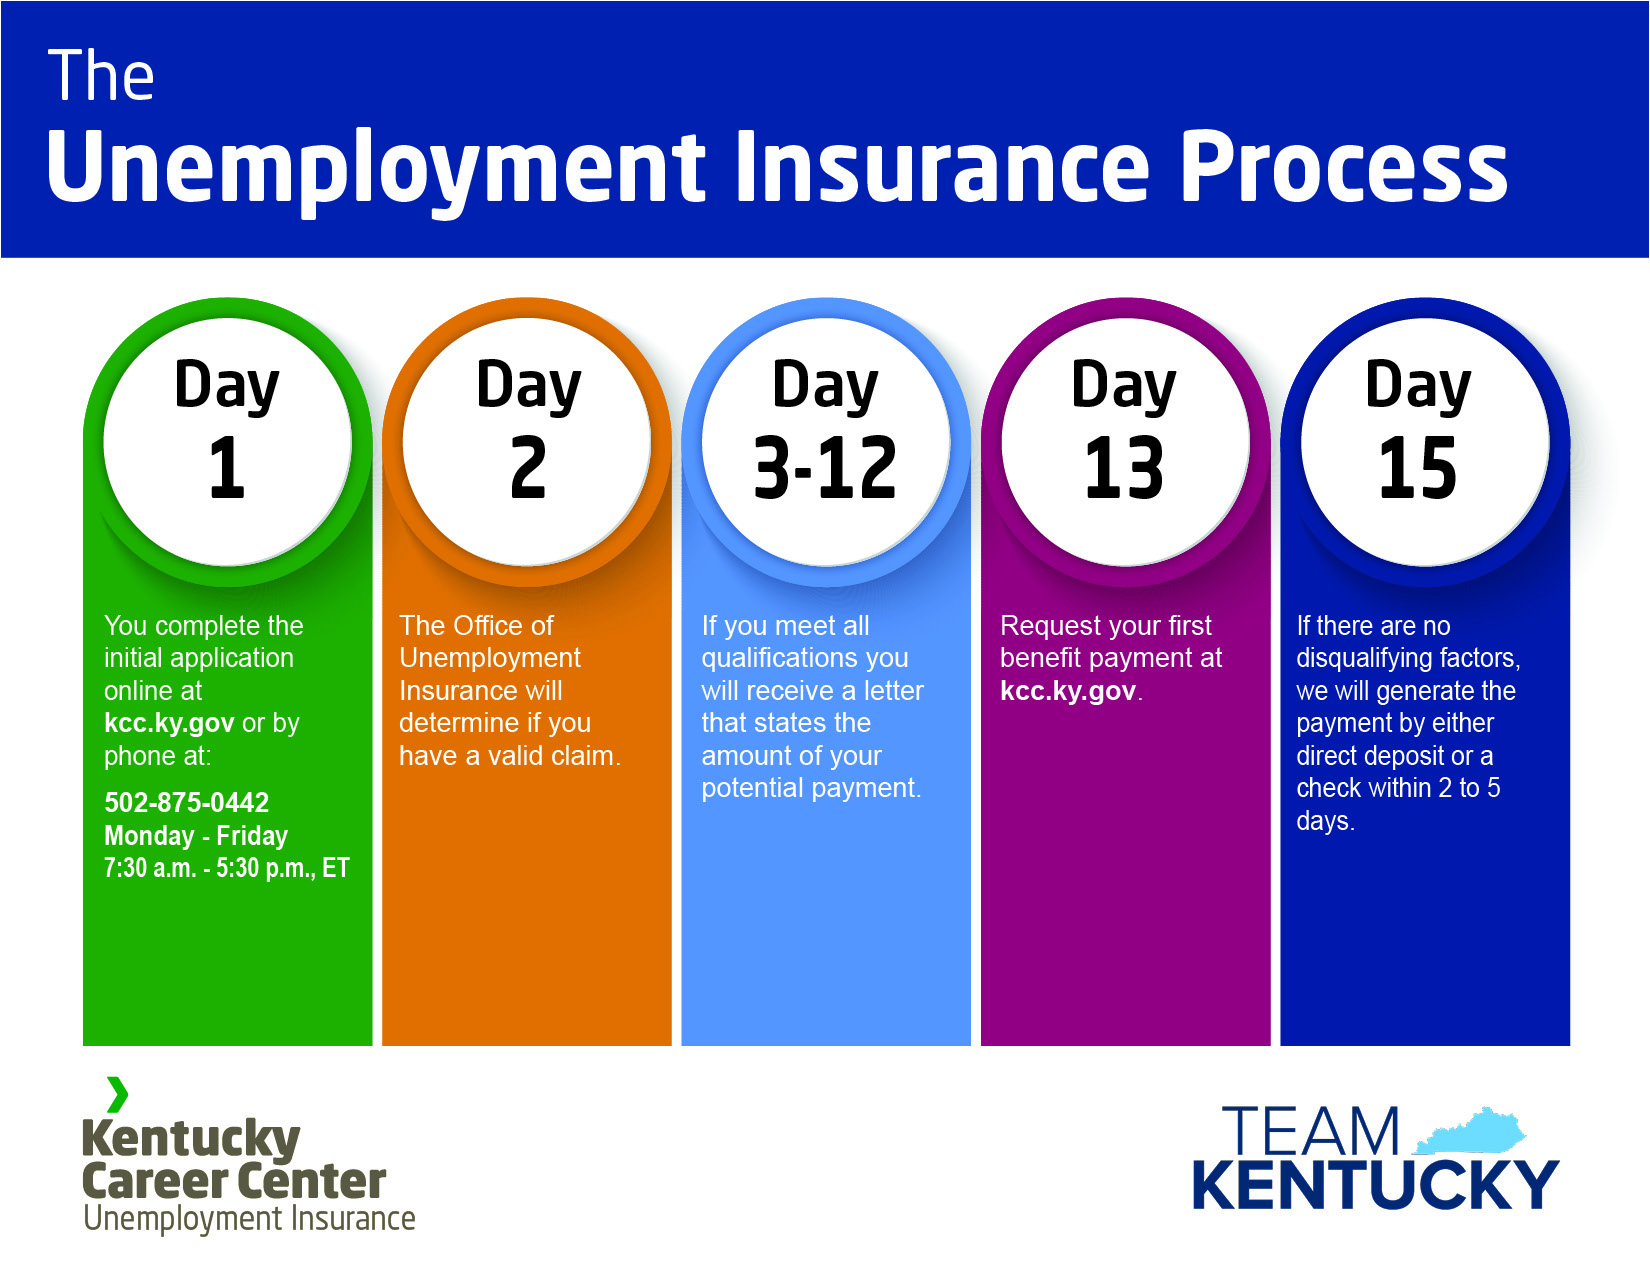 If You Are Unemployed Kentucky Career Center